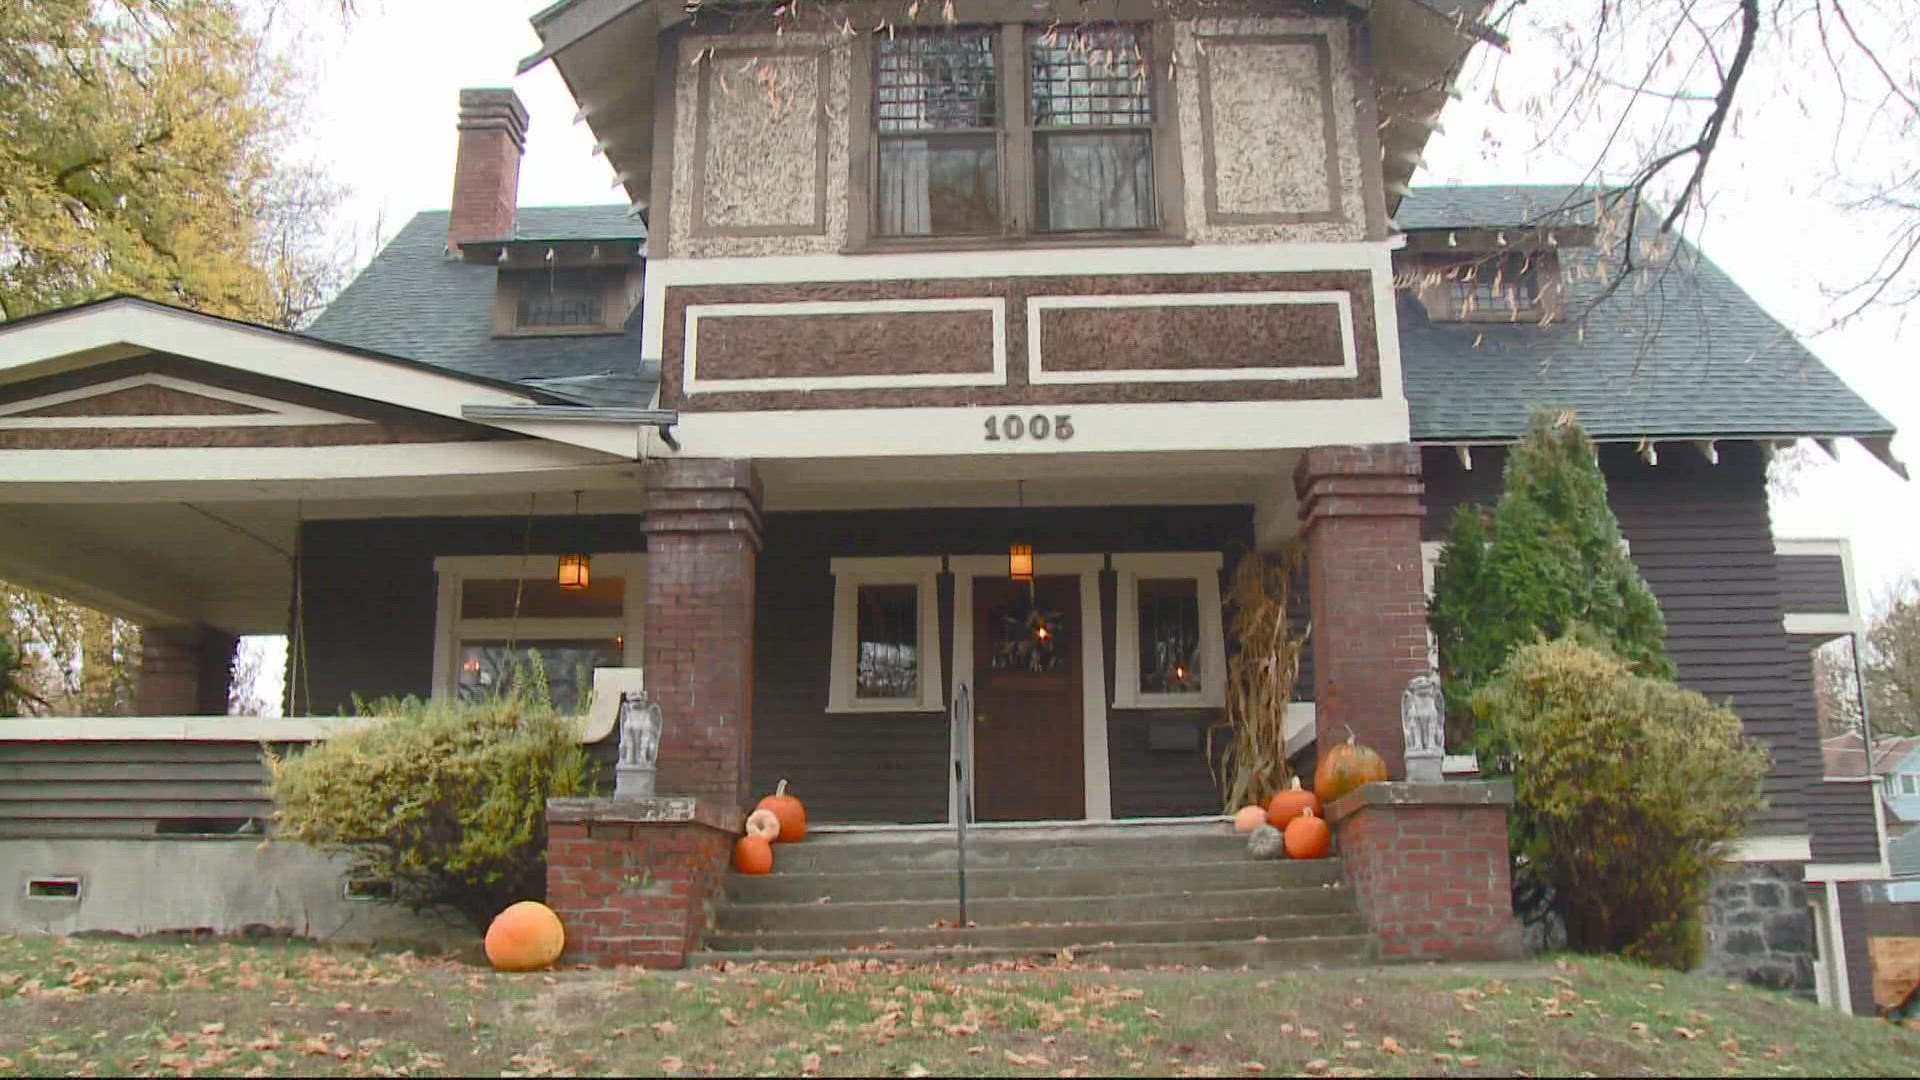 Living in a registered historic home can save people money on rent and taxes, according to Spokane Historic Preservation Officer Megan Duvall.